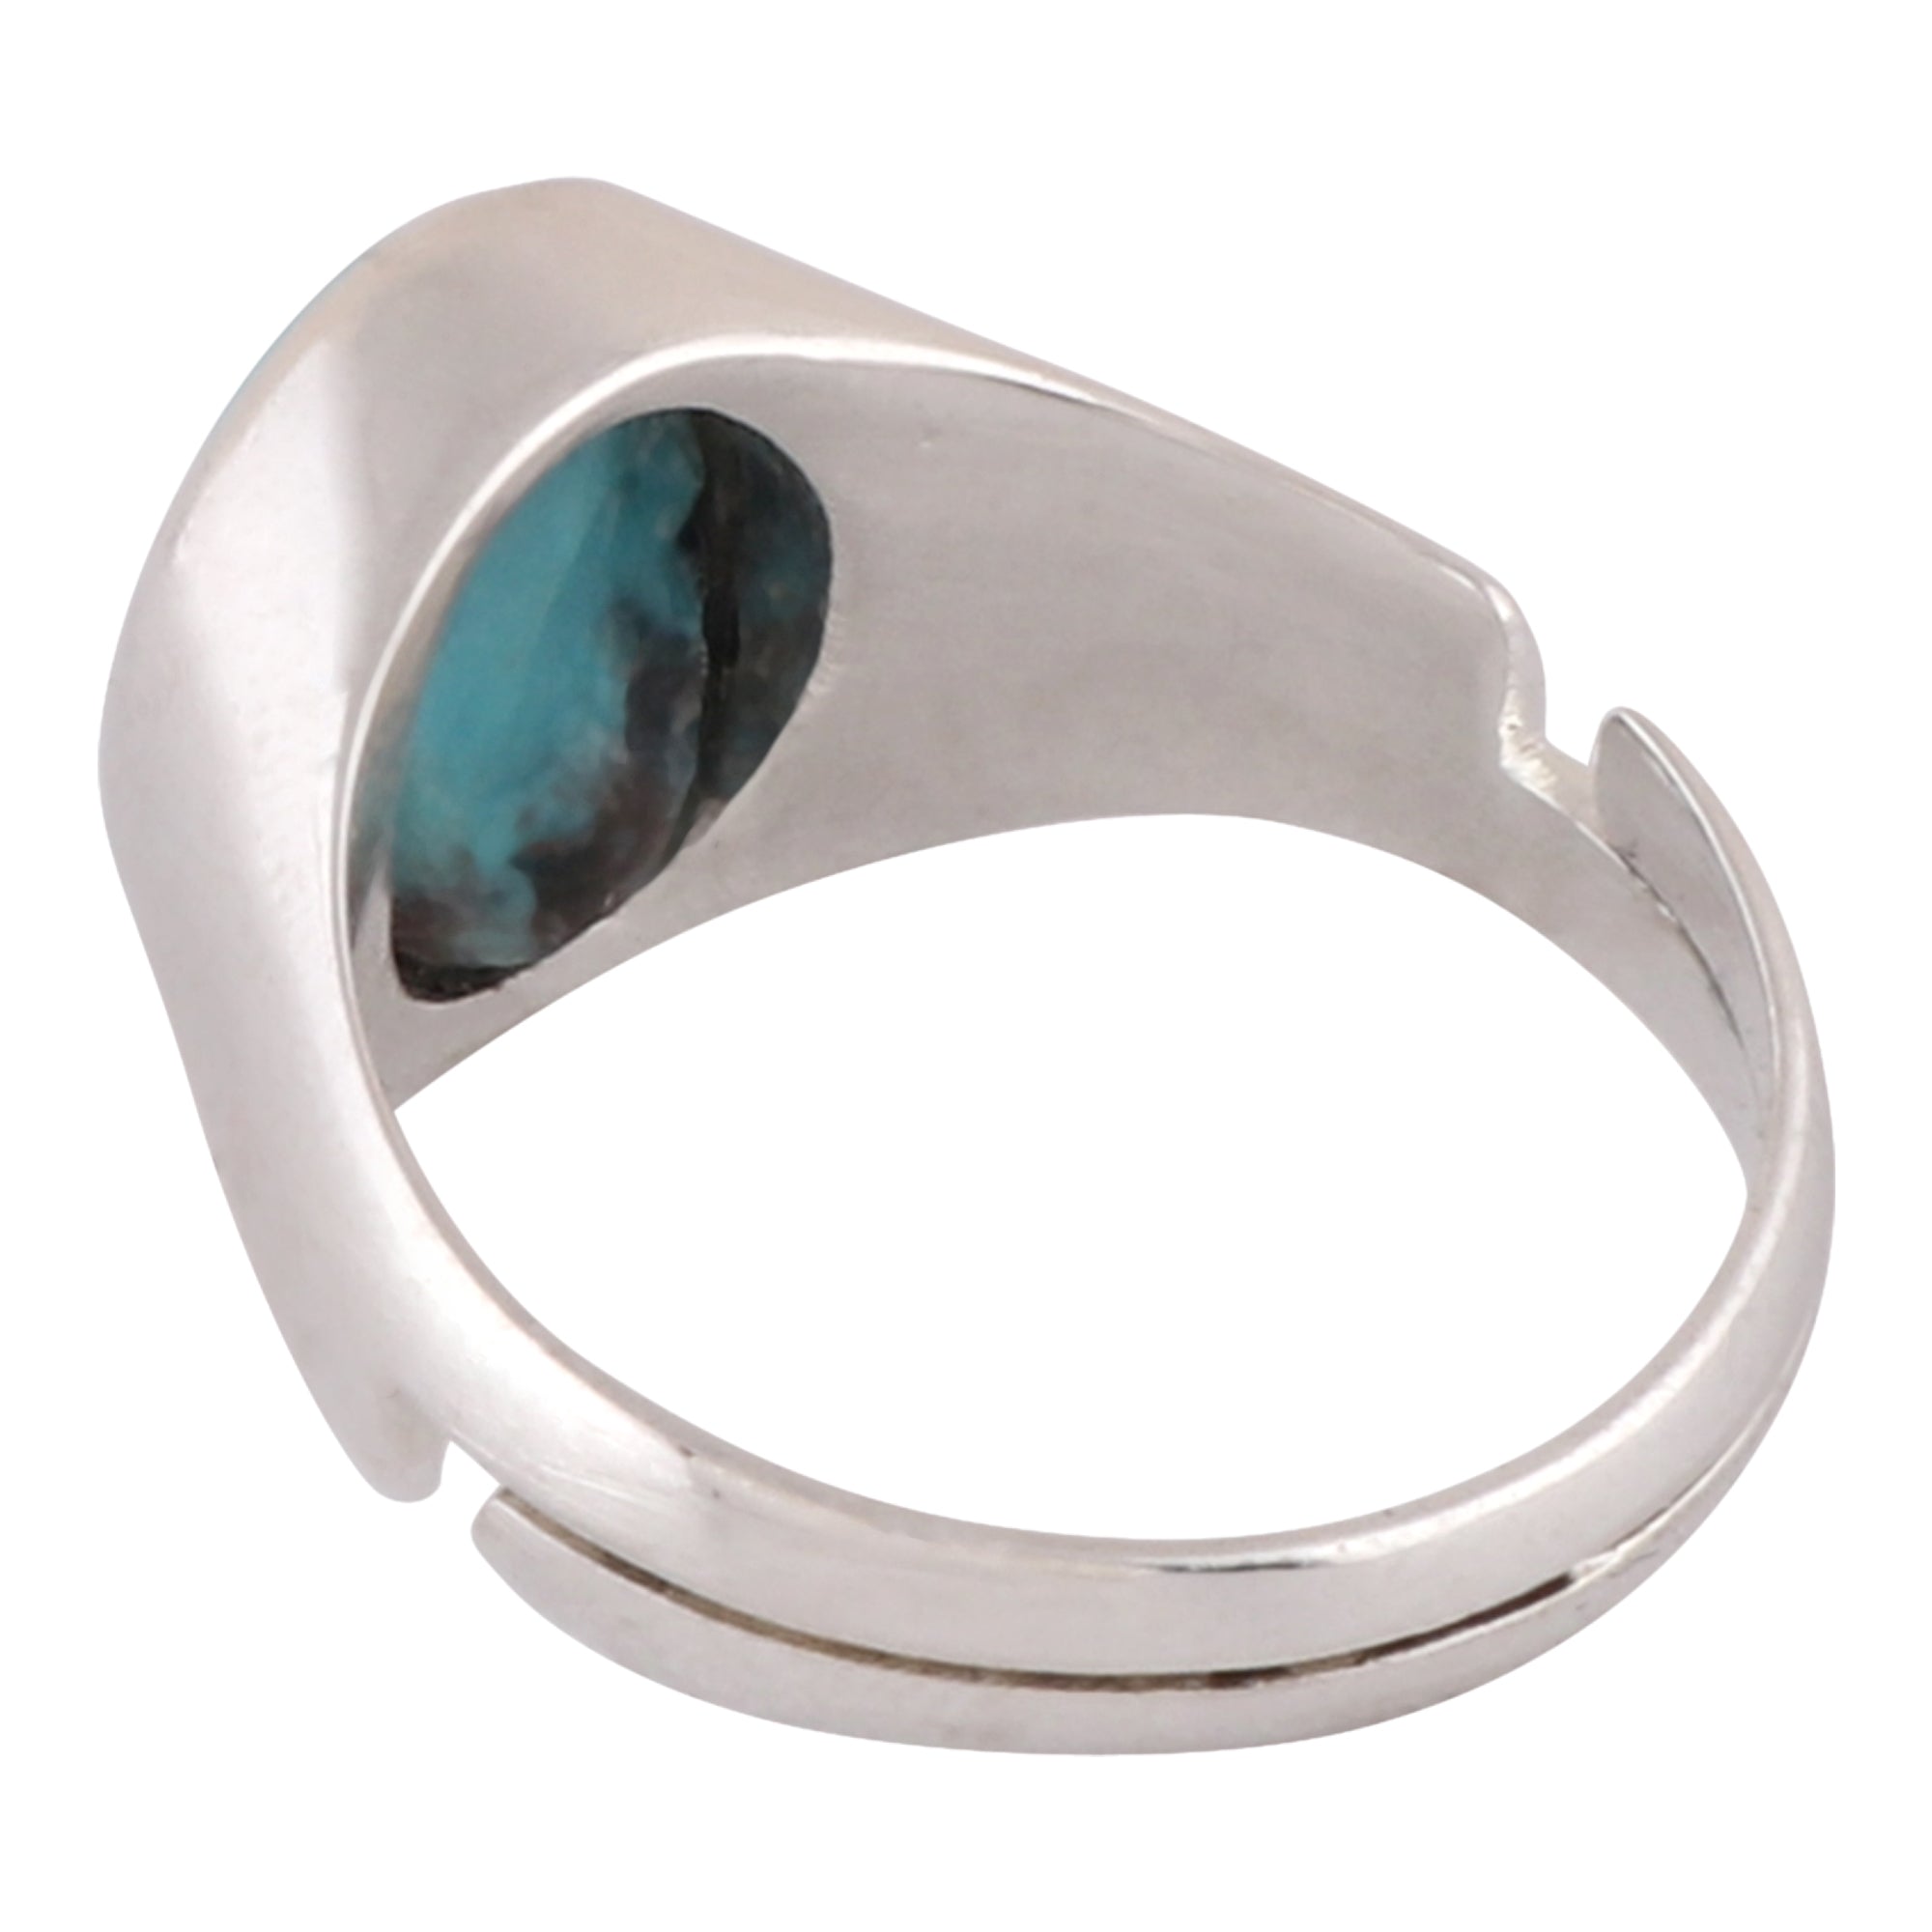 TURQUOISE FIROZA (approx. 7carat) Sterling silver (92.5% Purity) Ring Lab certified ADJUSTABLE RING